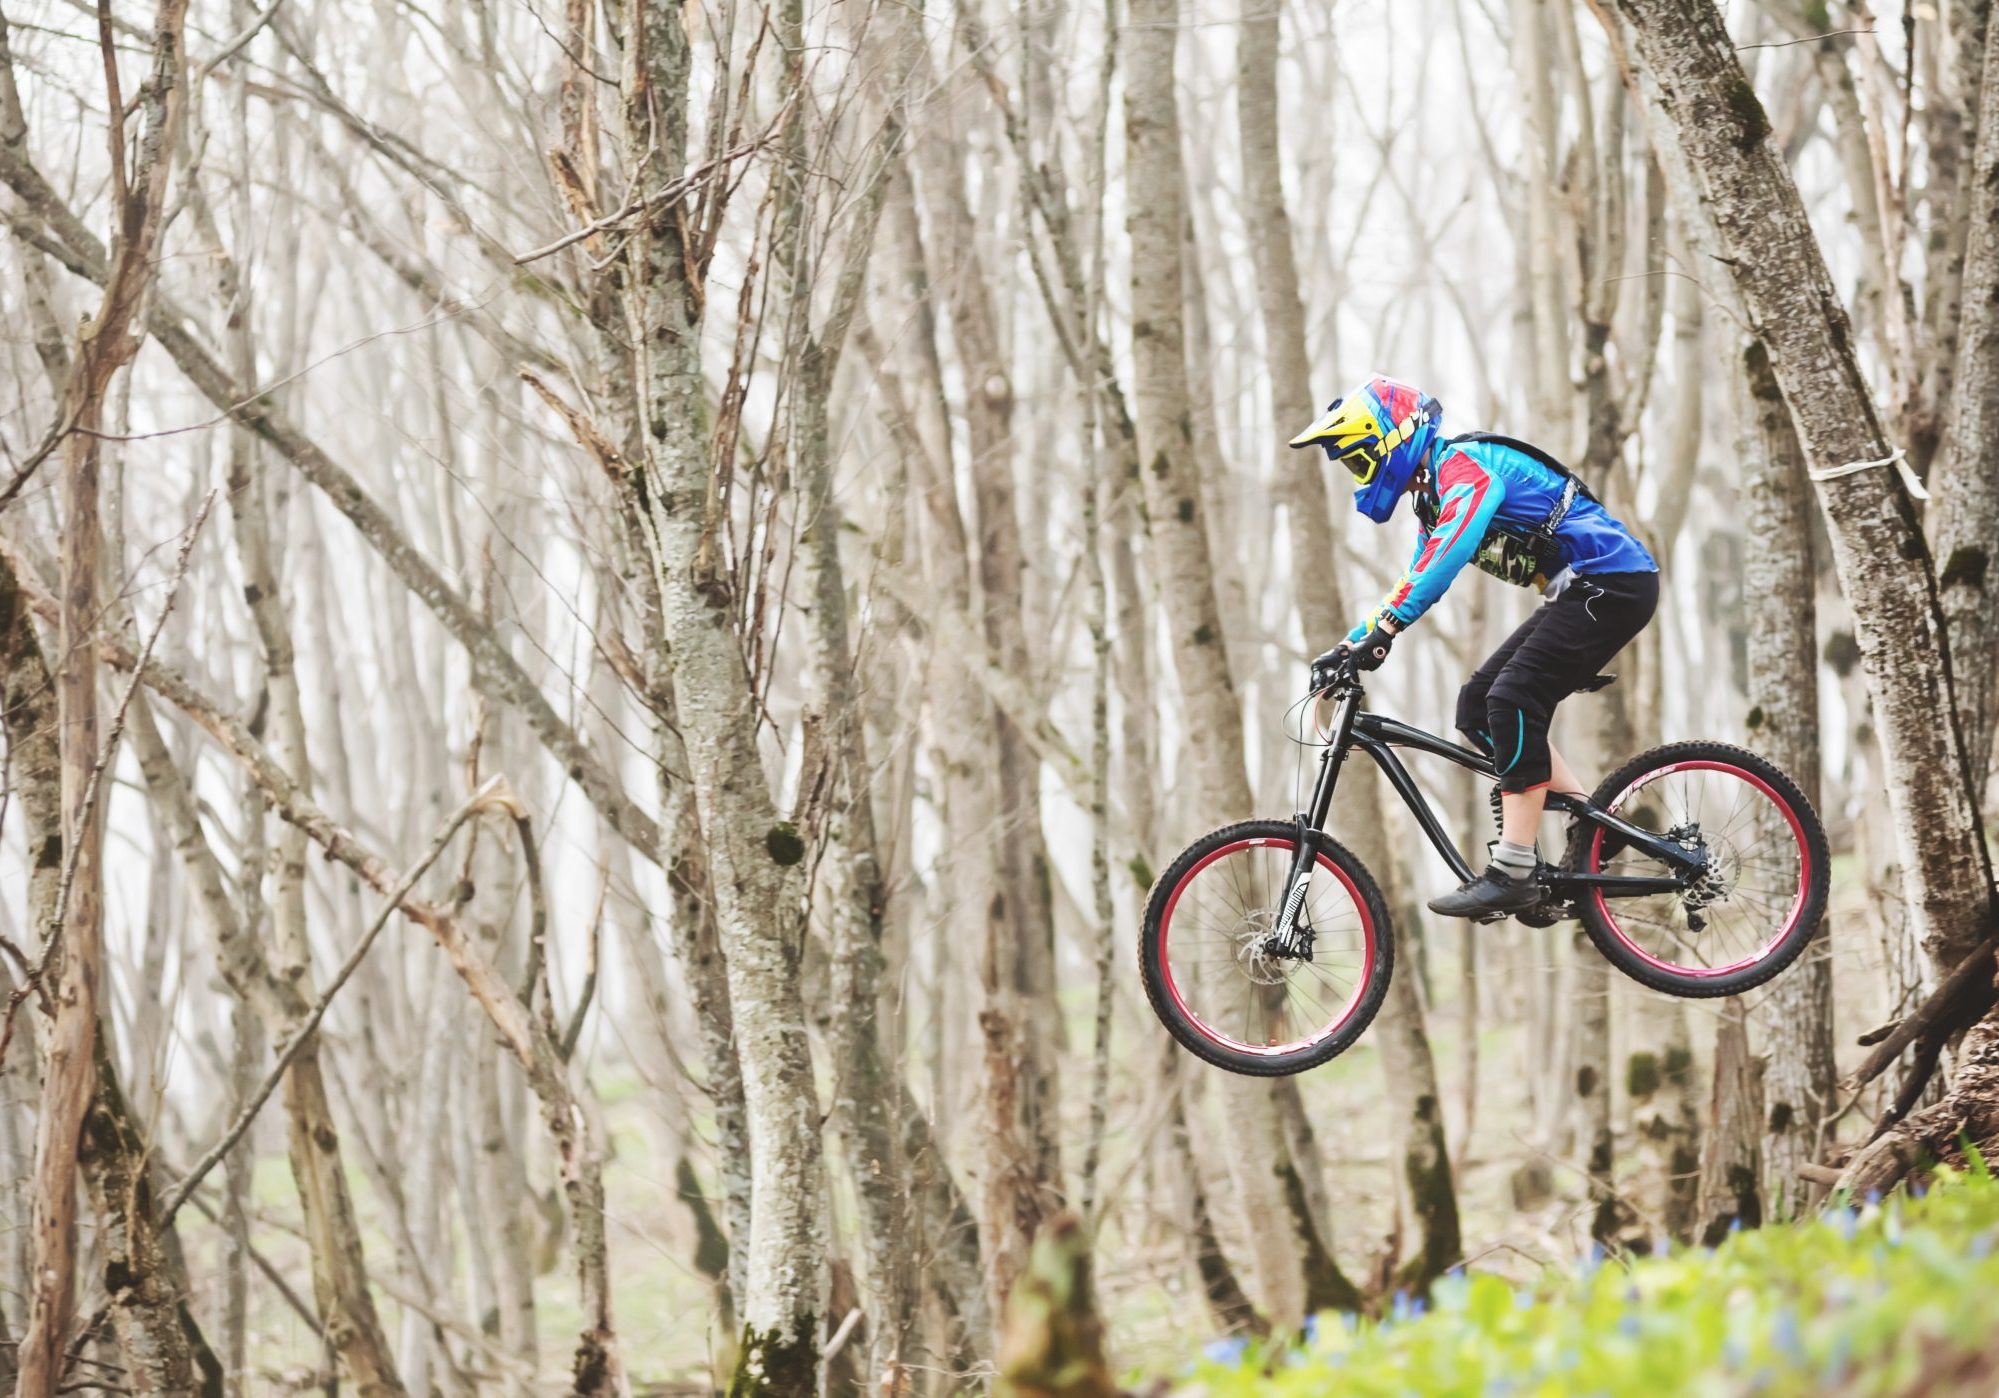 A mountain bike rider jumps from a springboard in a foggy forest.